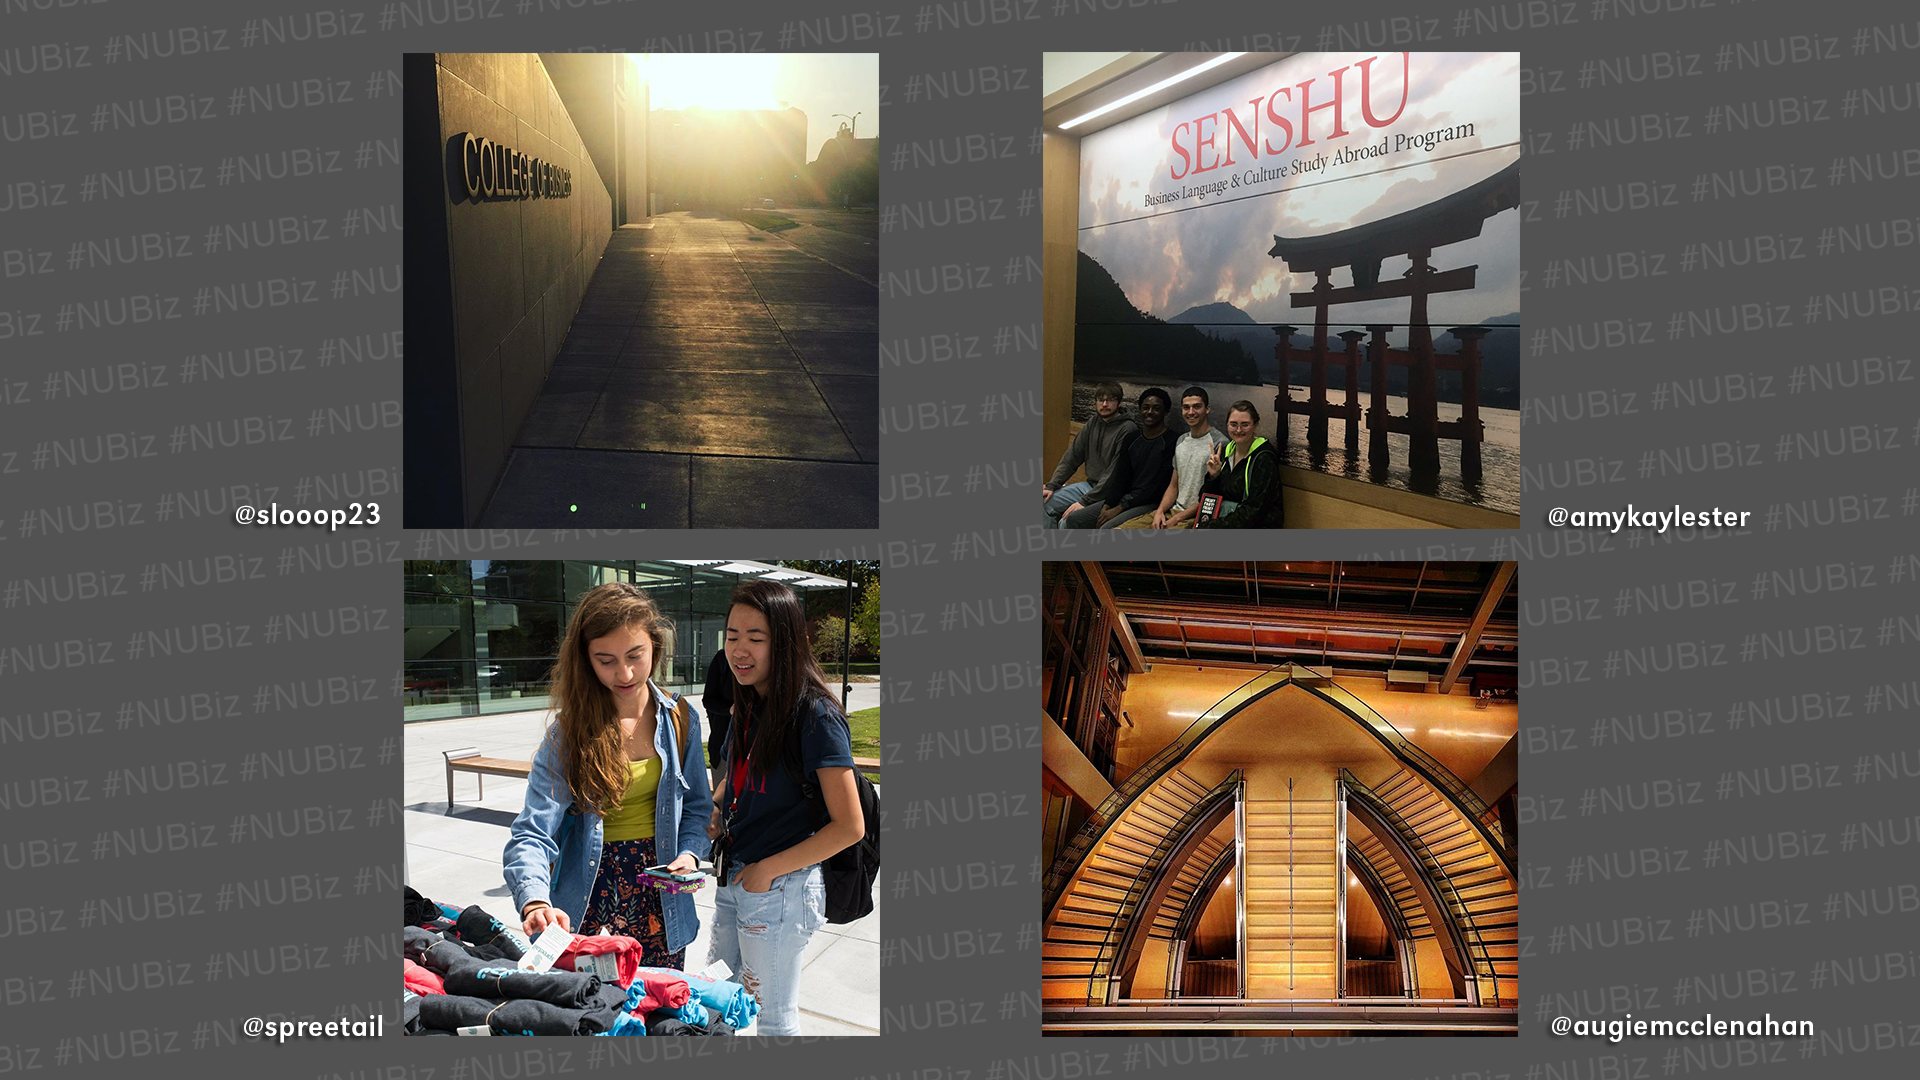 Tag your photos on Instagram and Twitter with #NUBiz to be featured.